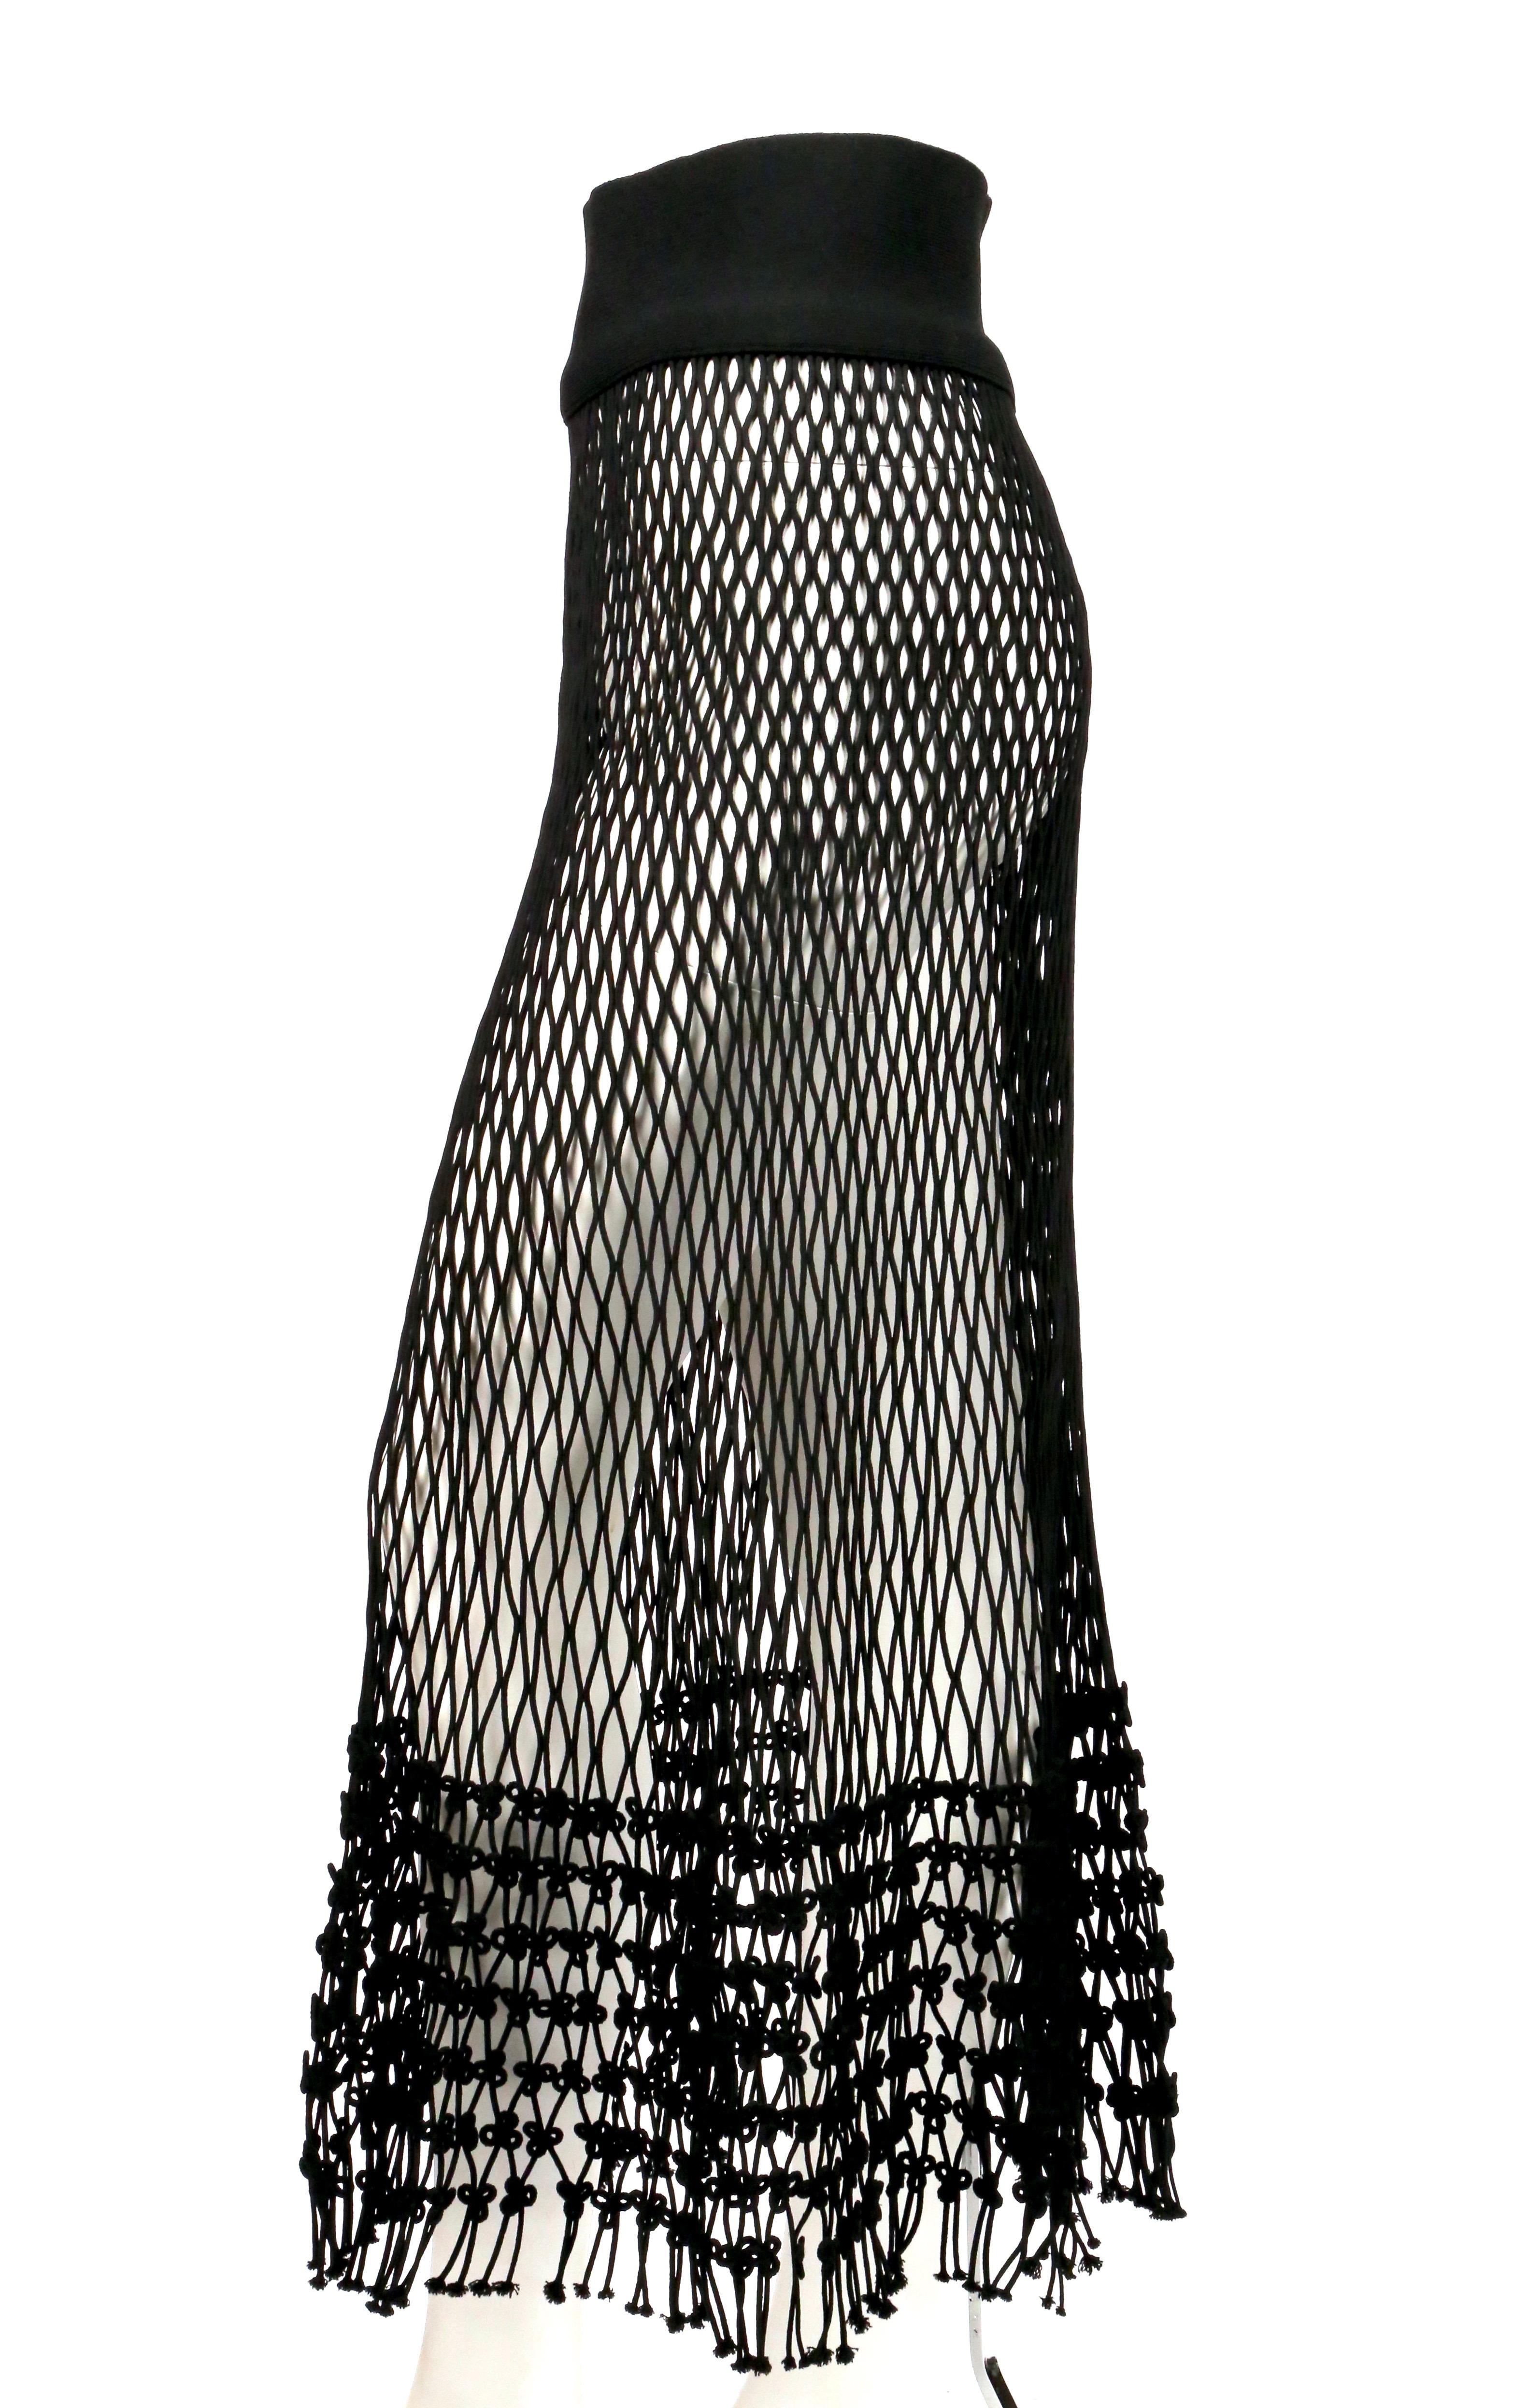 Jet-black, net skirt designed by Phoebe Philo for Celine exactly as seen on the spring 2014 runway and featured in the spring ad campaign. French size S. Approximate measurements (unstretched): waist 26